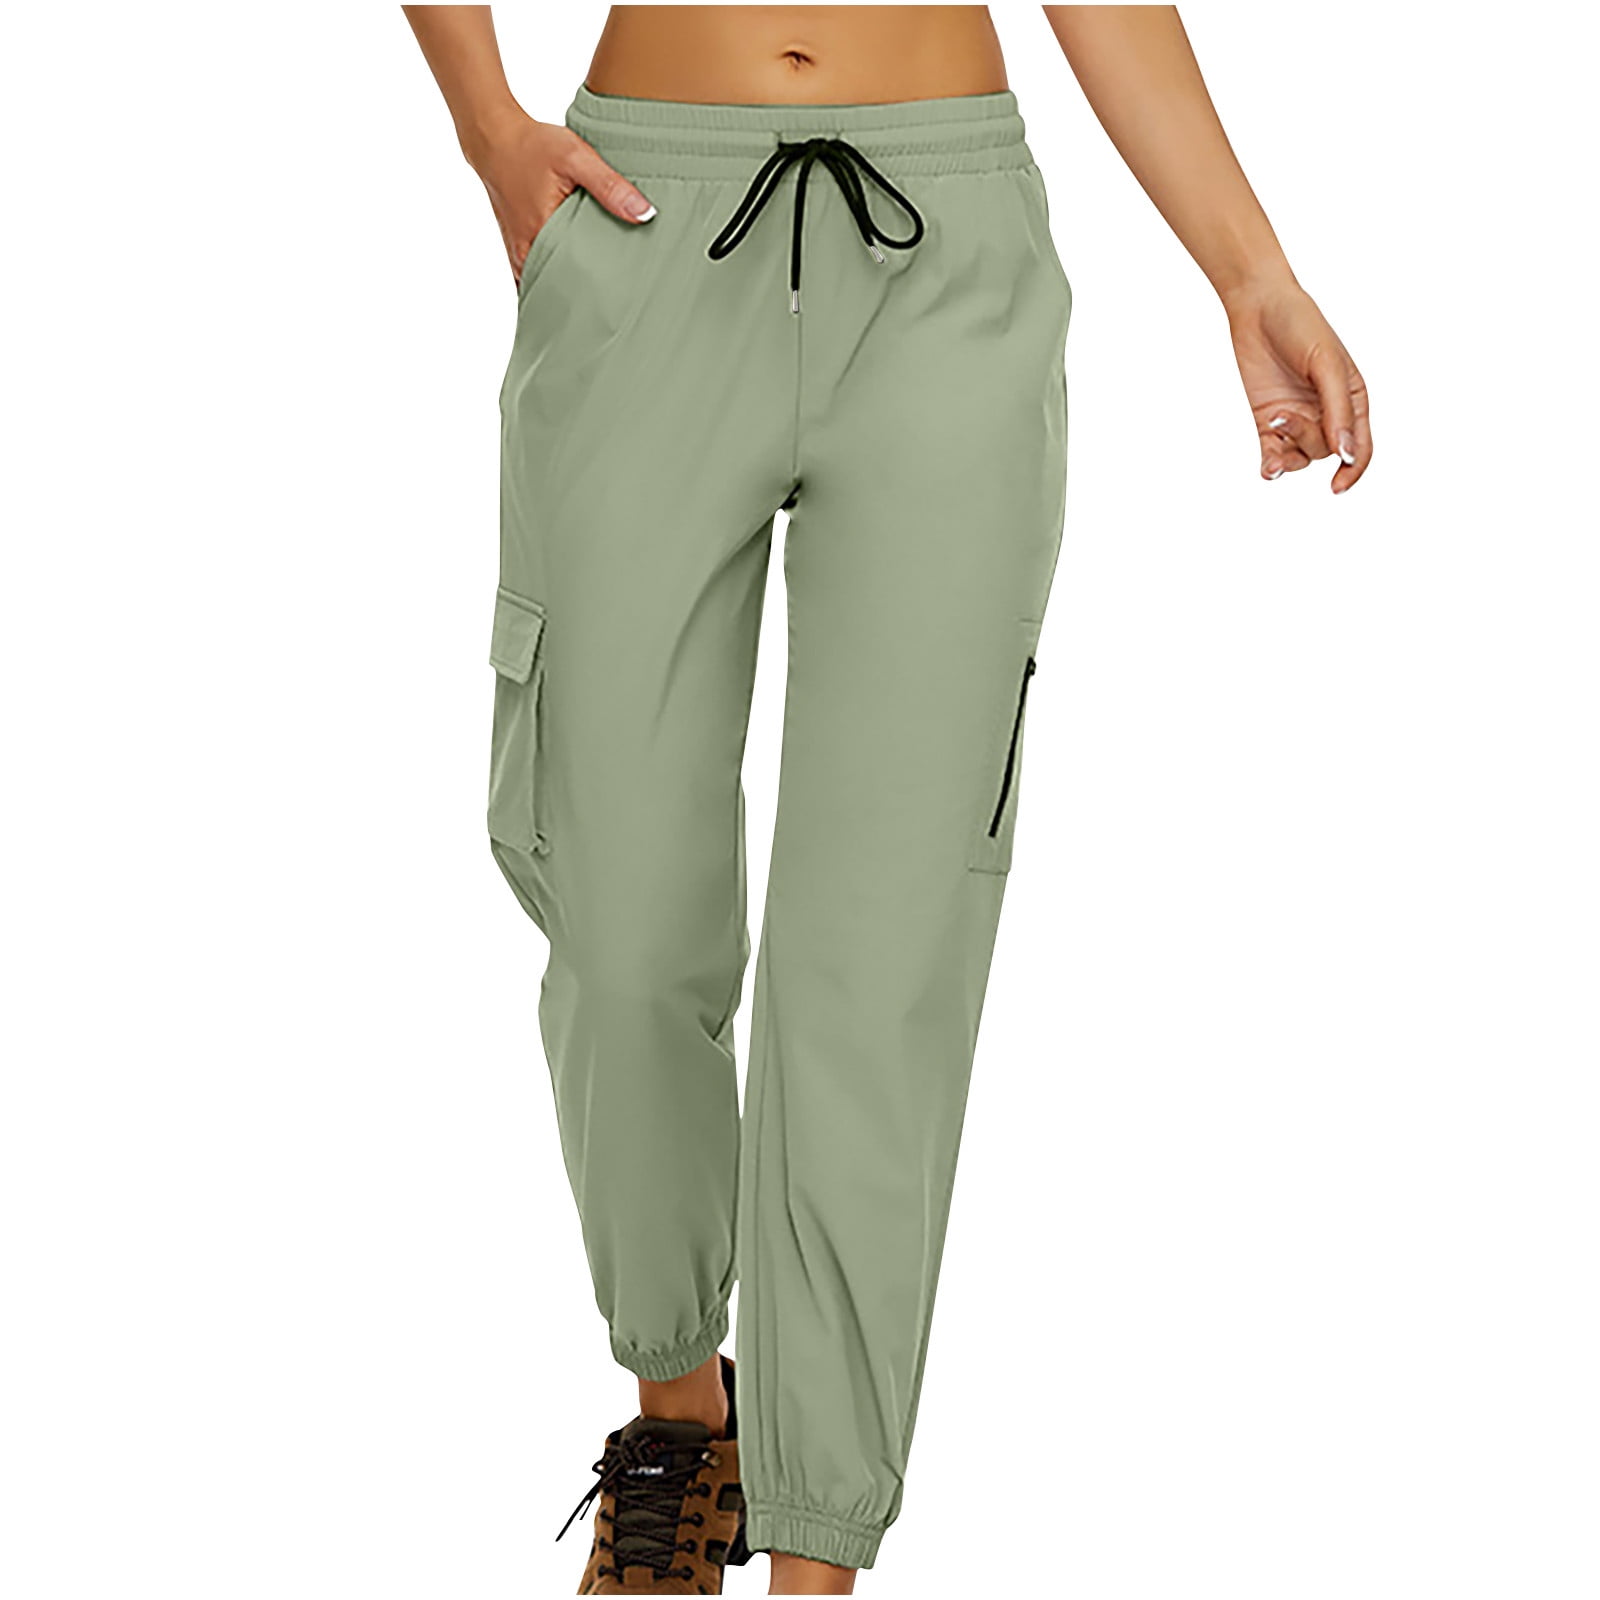 Amtdh Women's Trendy Sweatpants Clearance Solid Color Sports Drawstring ...